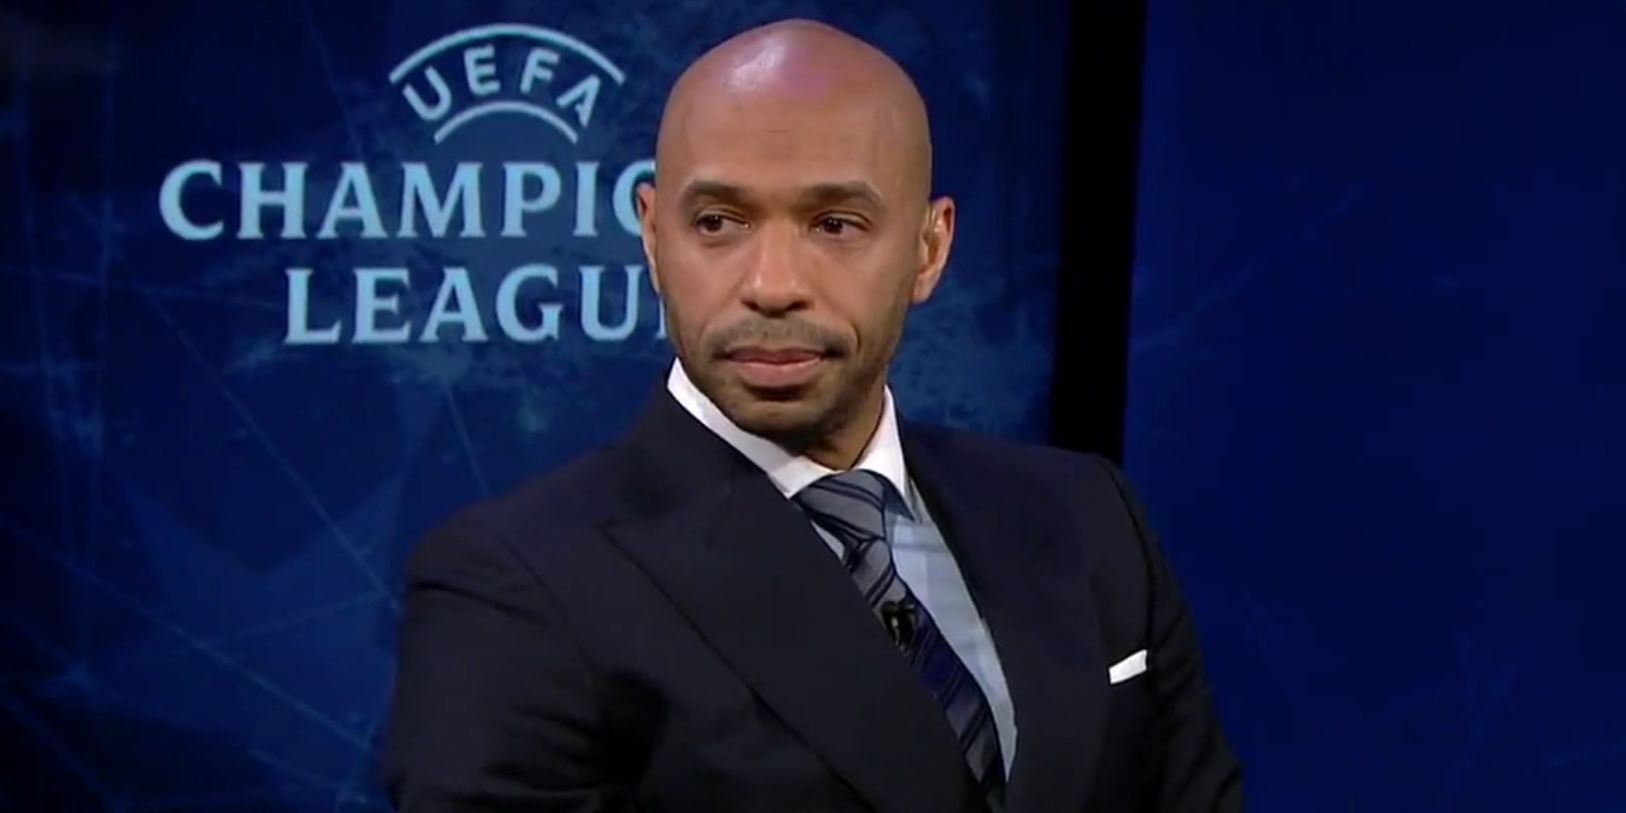 (Video) Thierry Henry eulogises over Mo Salah’s ‘outstanding’ assist for Sadio Mane and why he’s ‘better than what he used to be’